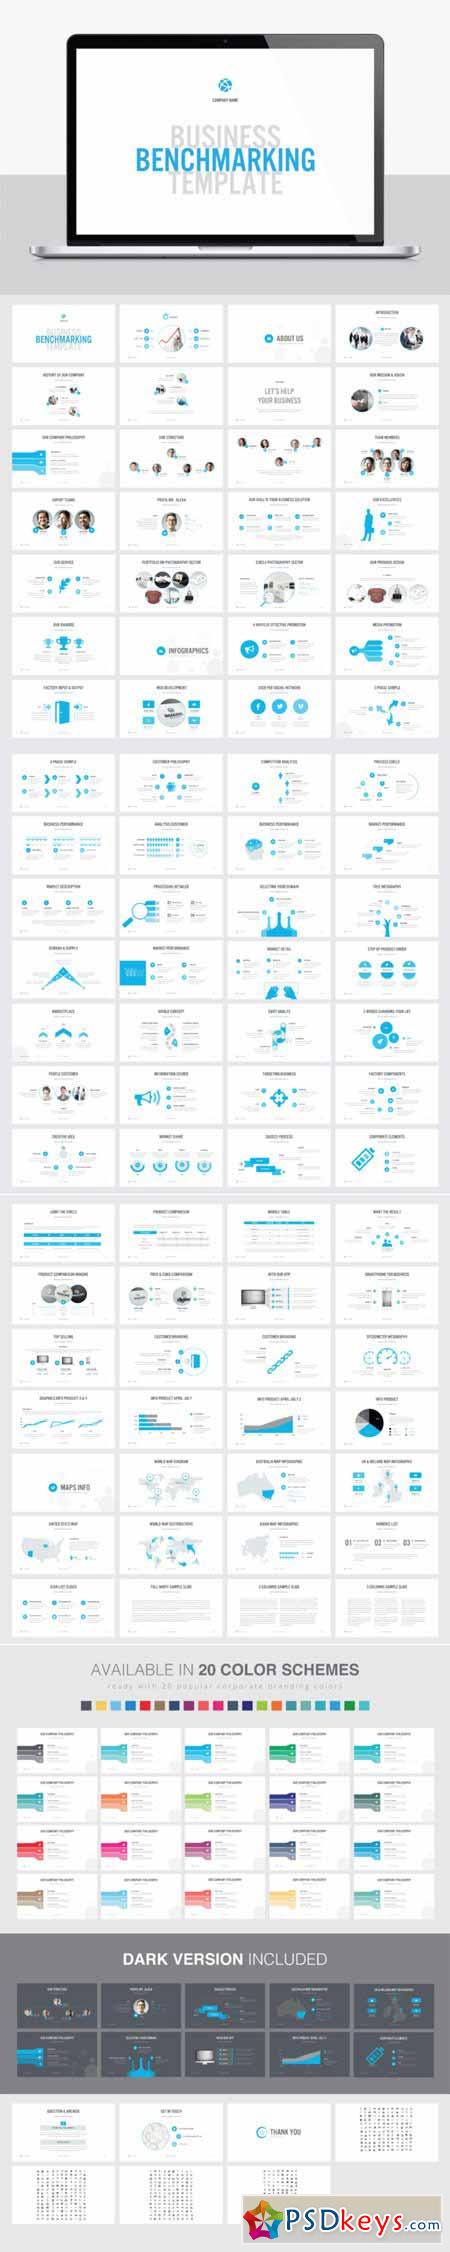 BENCHMARKING PowerPoint Template 470870